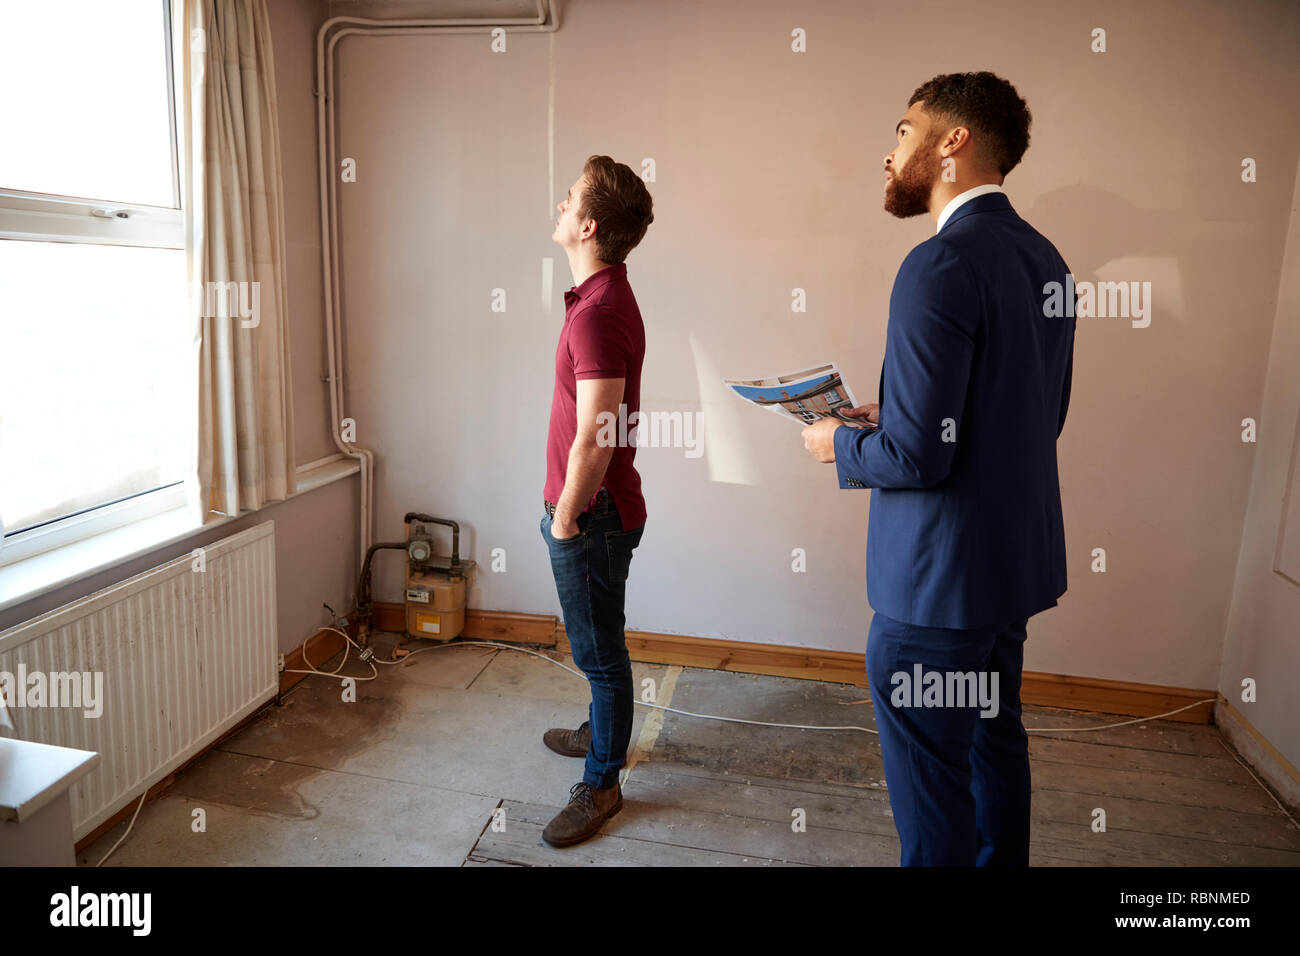 Male First Time Buyer Looking Around House For Renovation With Realtor Stock Photo